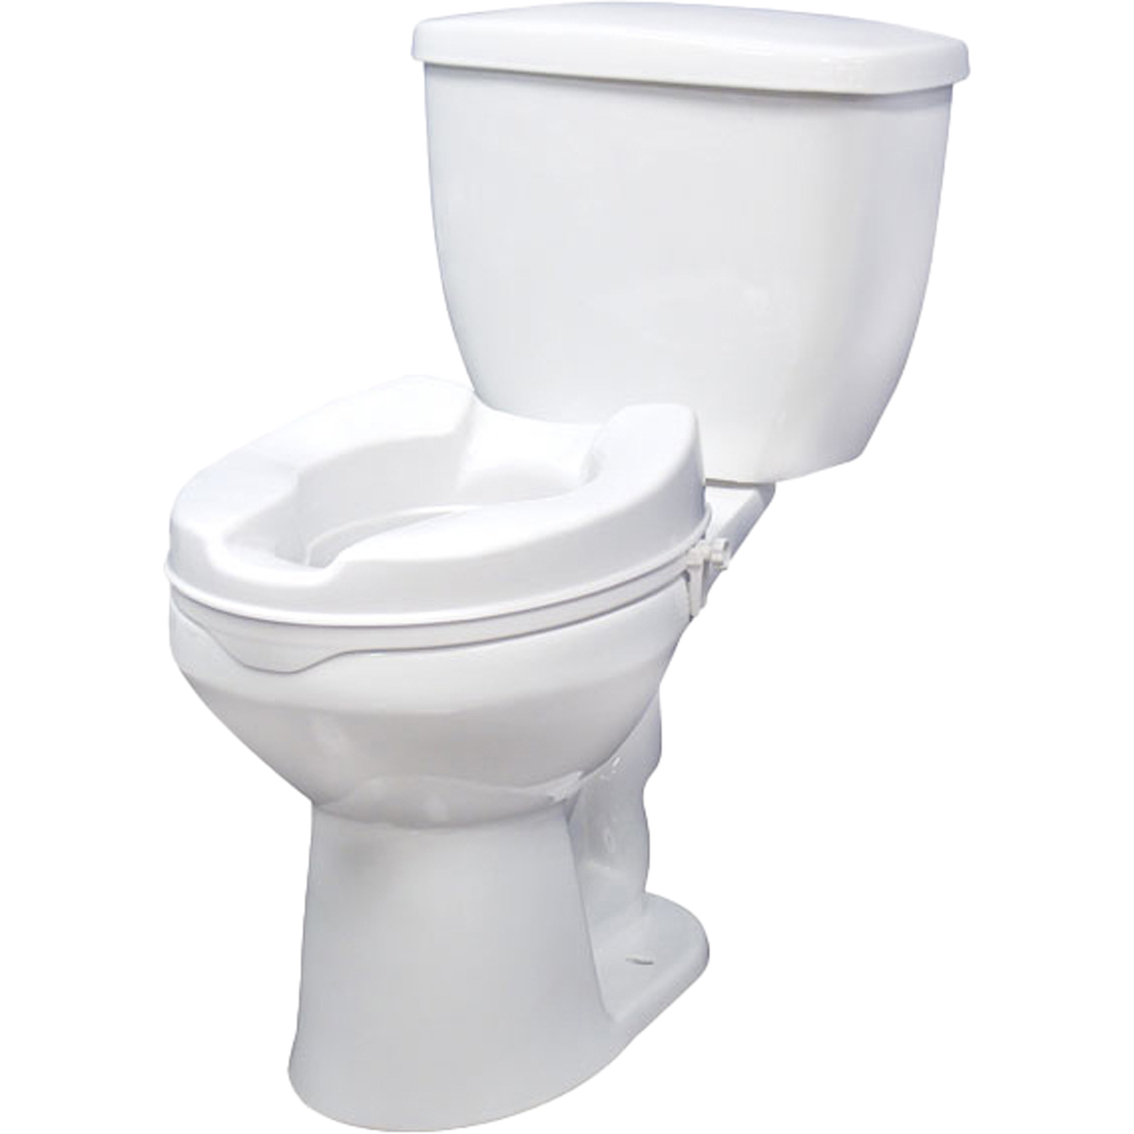 Drive Medical Raised Toilet Seat 4 in. - Image 2 of 2